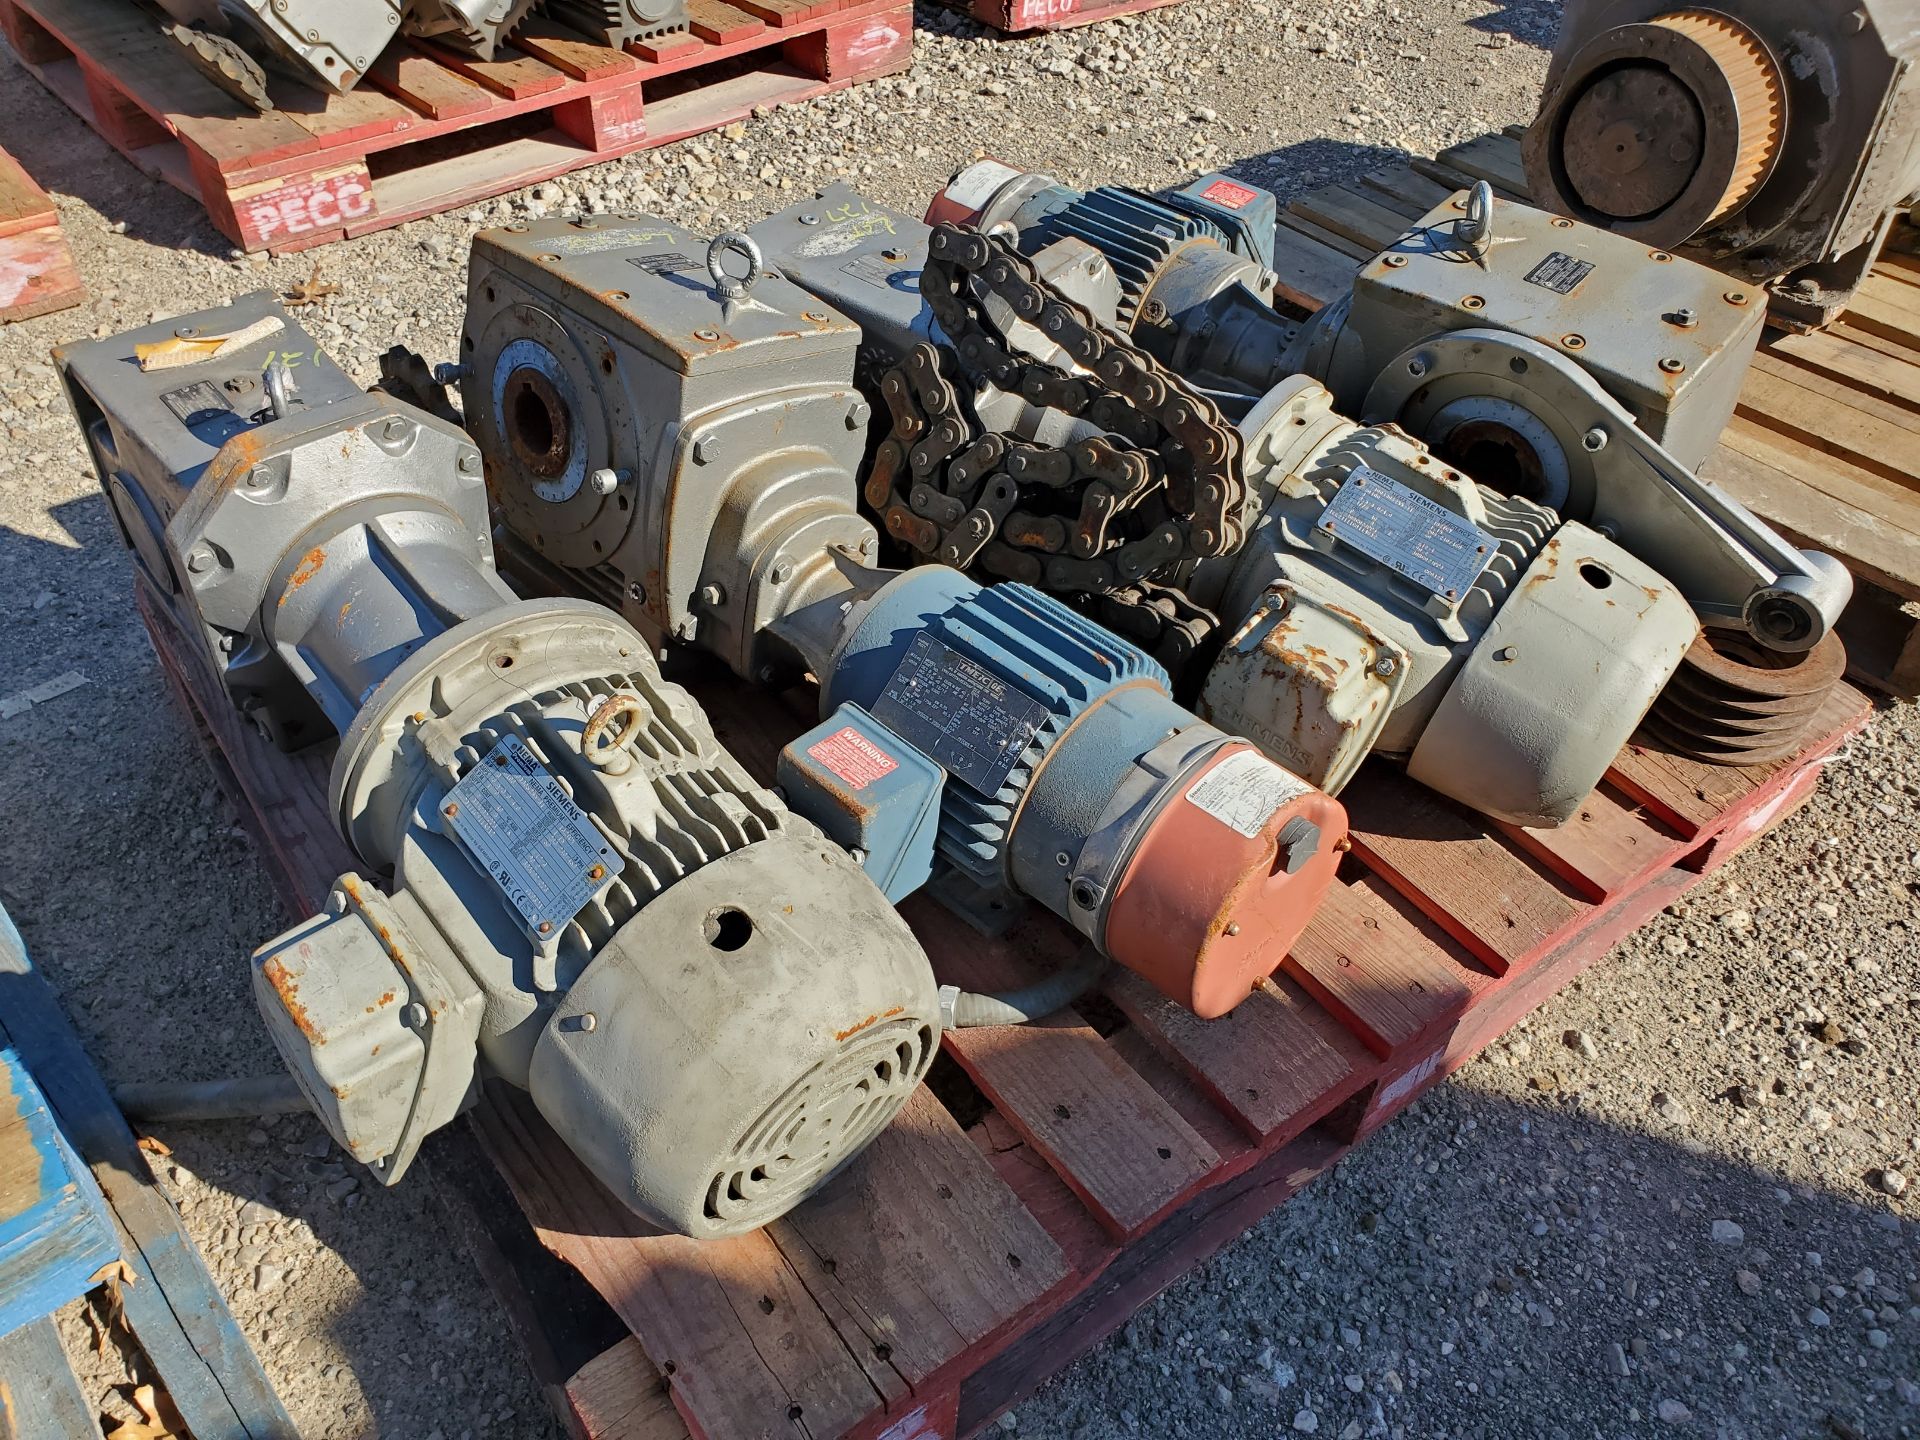 (4) NORD DRIVESYSTEMS 25.39:1 GEAR REDUCERS WITH GE 1 HP ELECTRIC MOTORS - Image 8 of 9